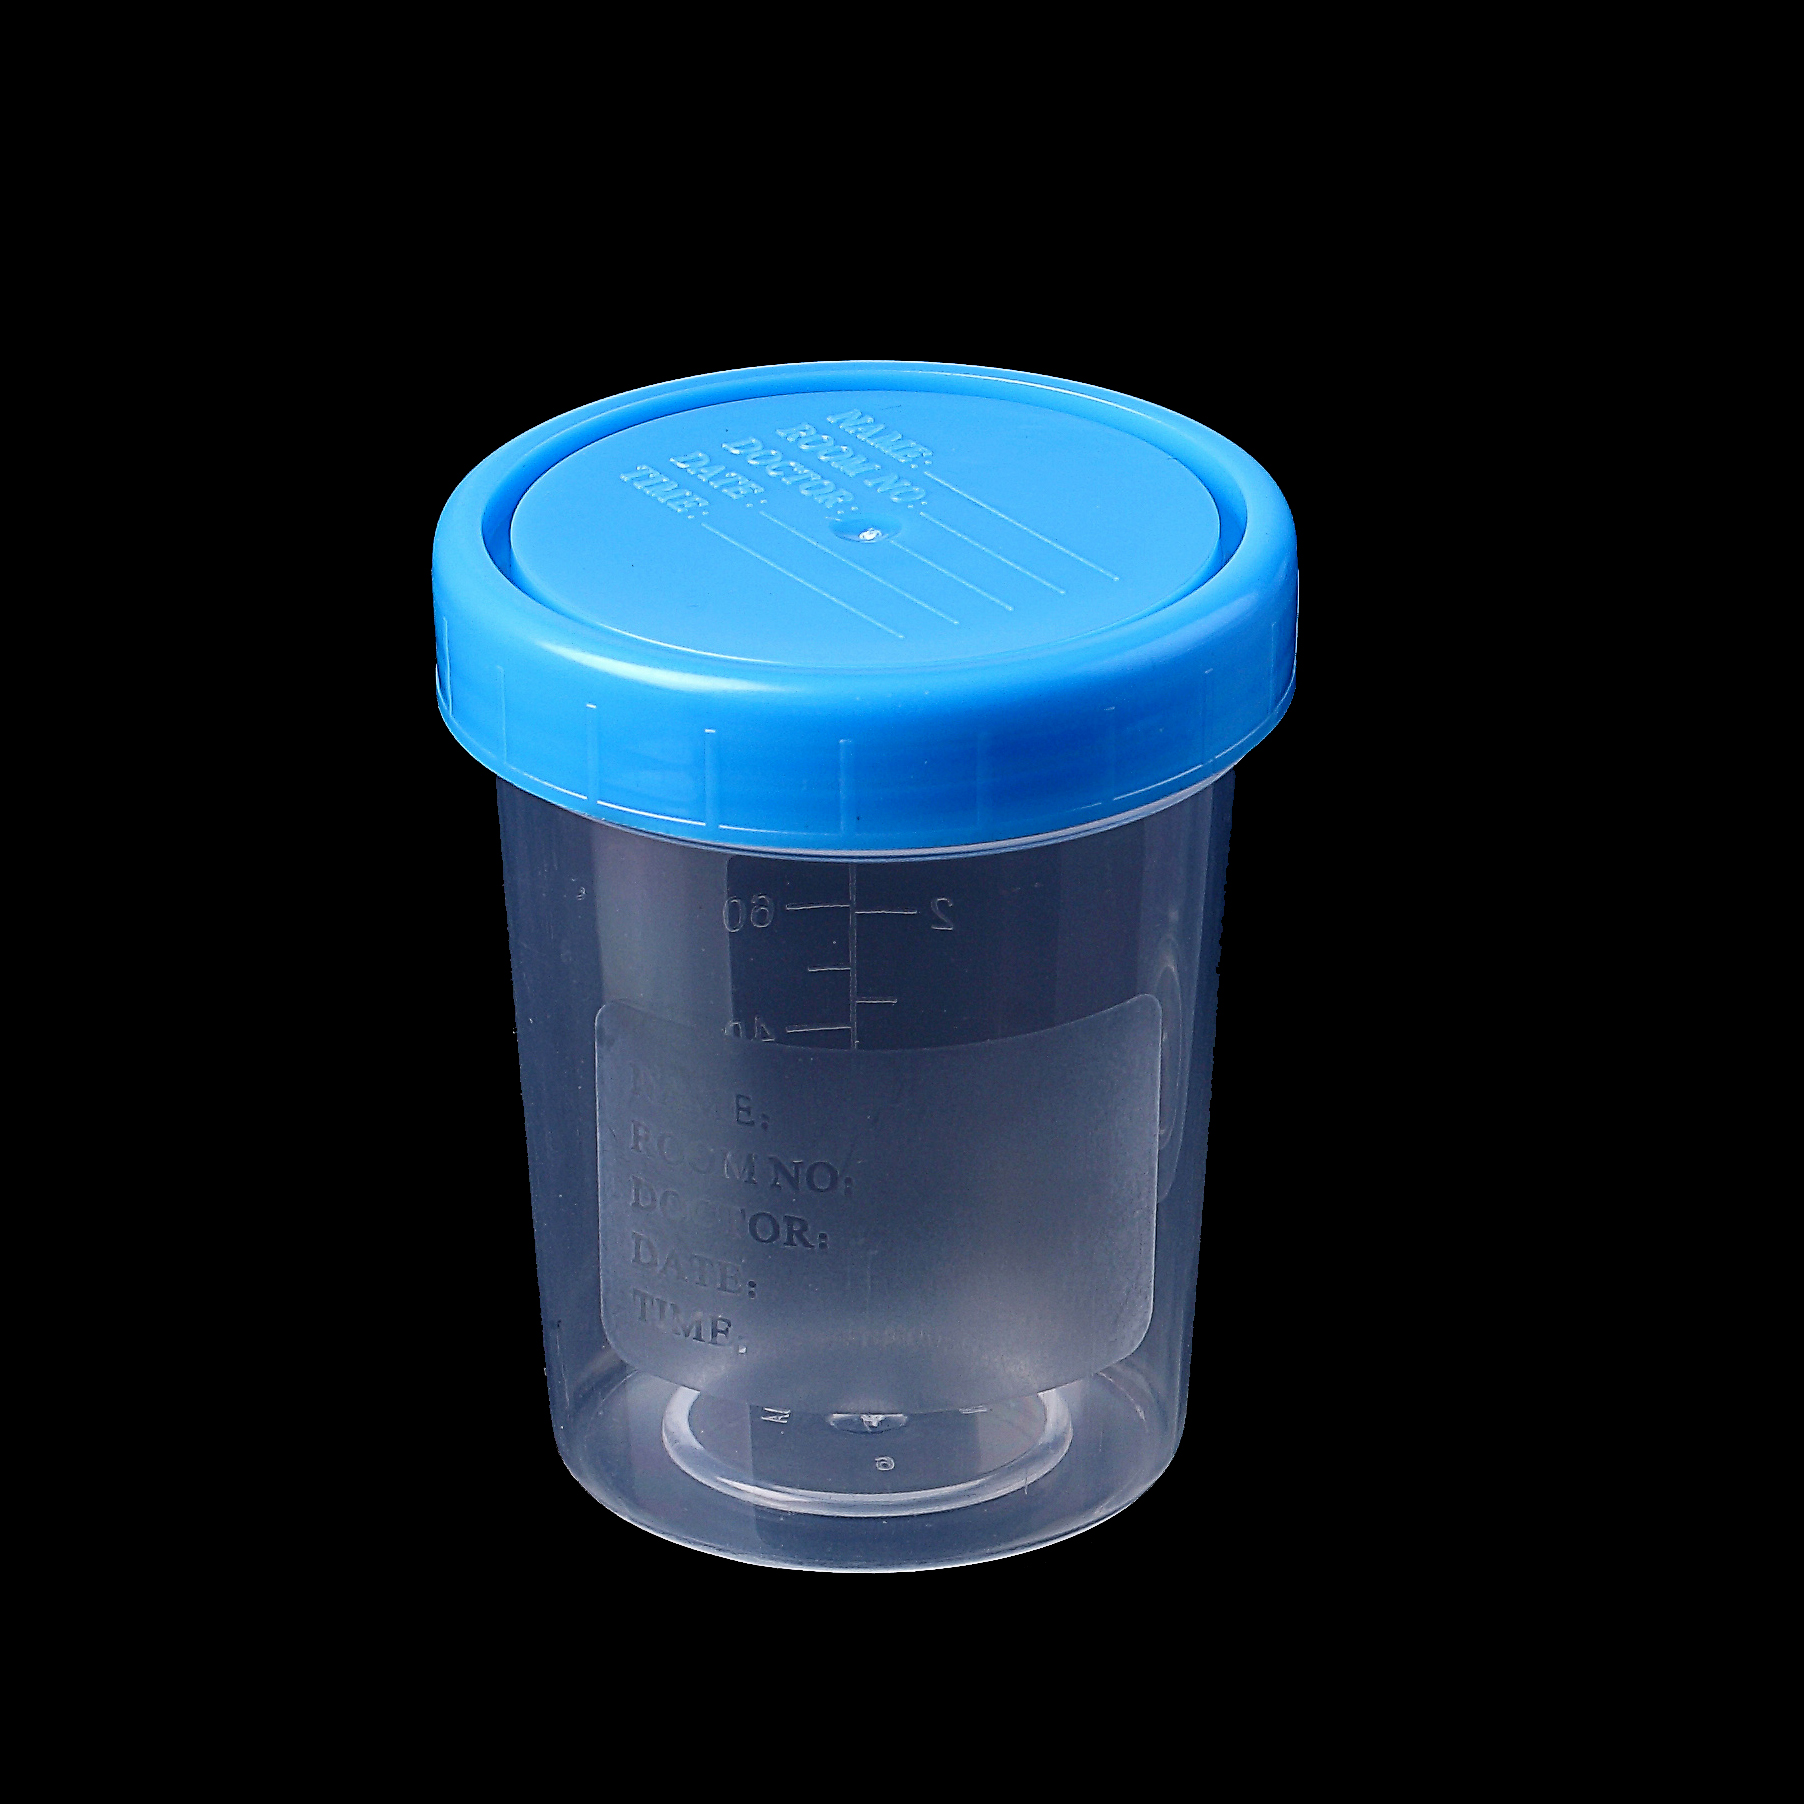 Urine Collection Containers,4OZ/120ML,Screw Cap